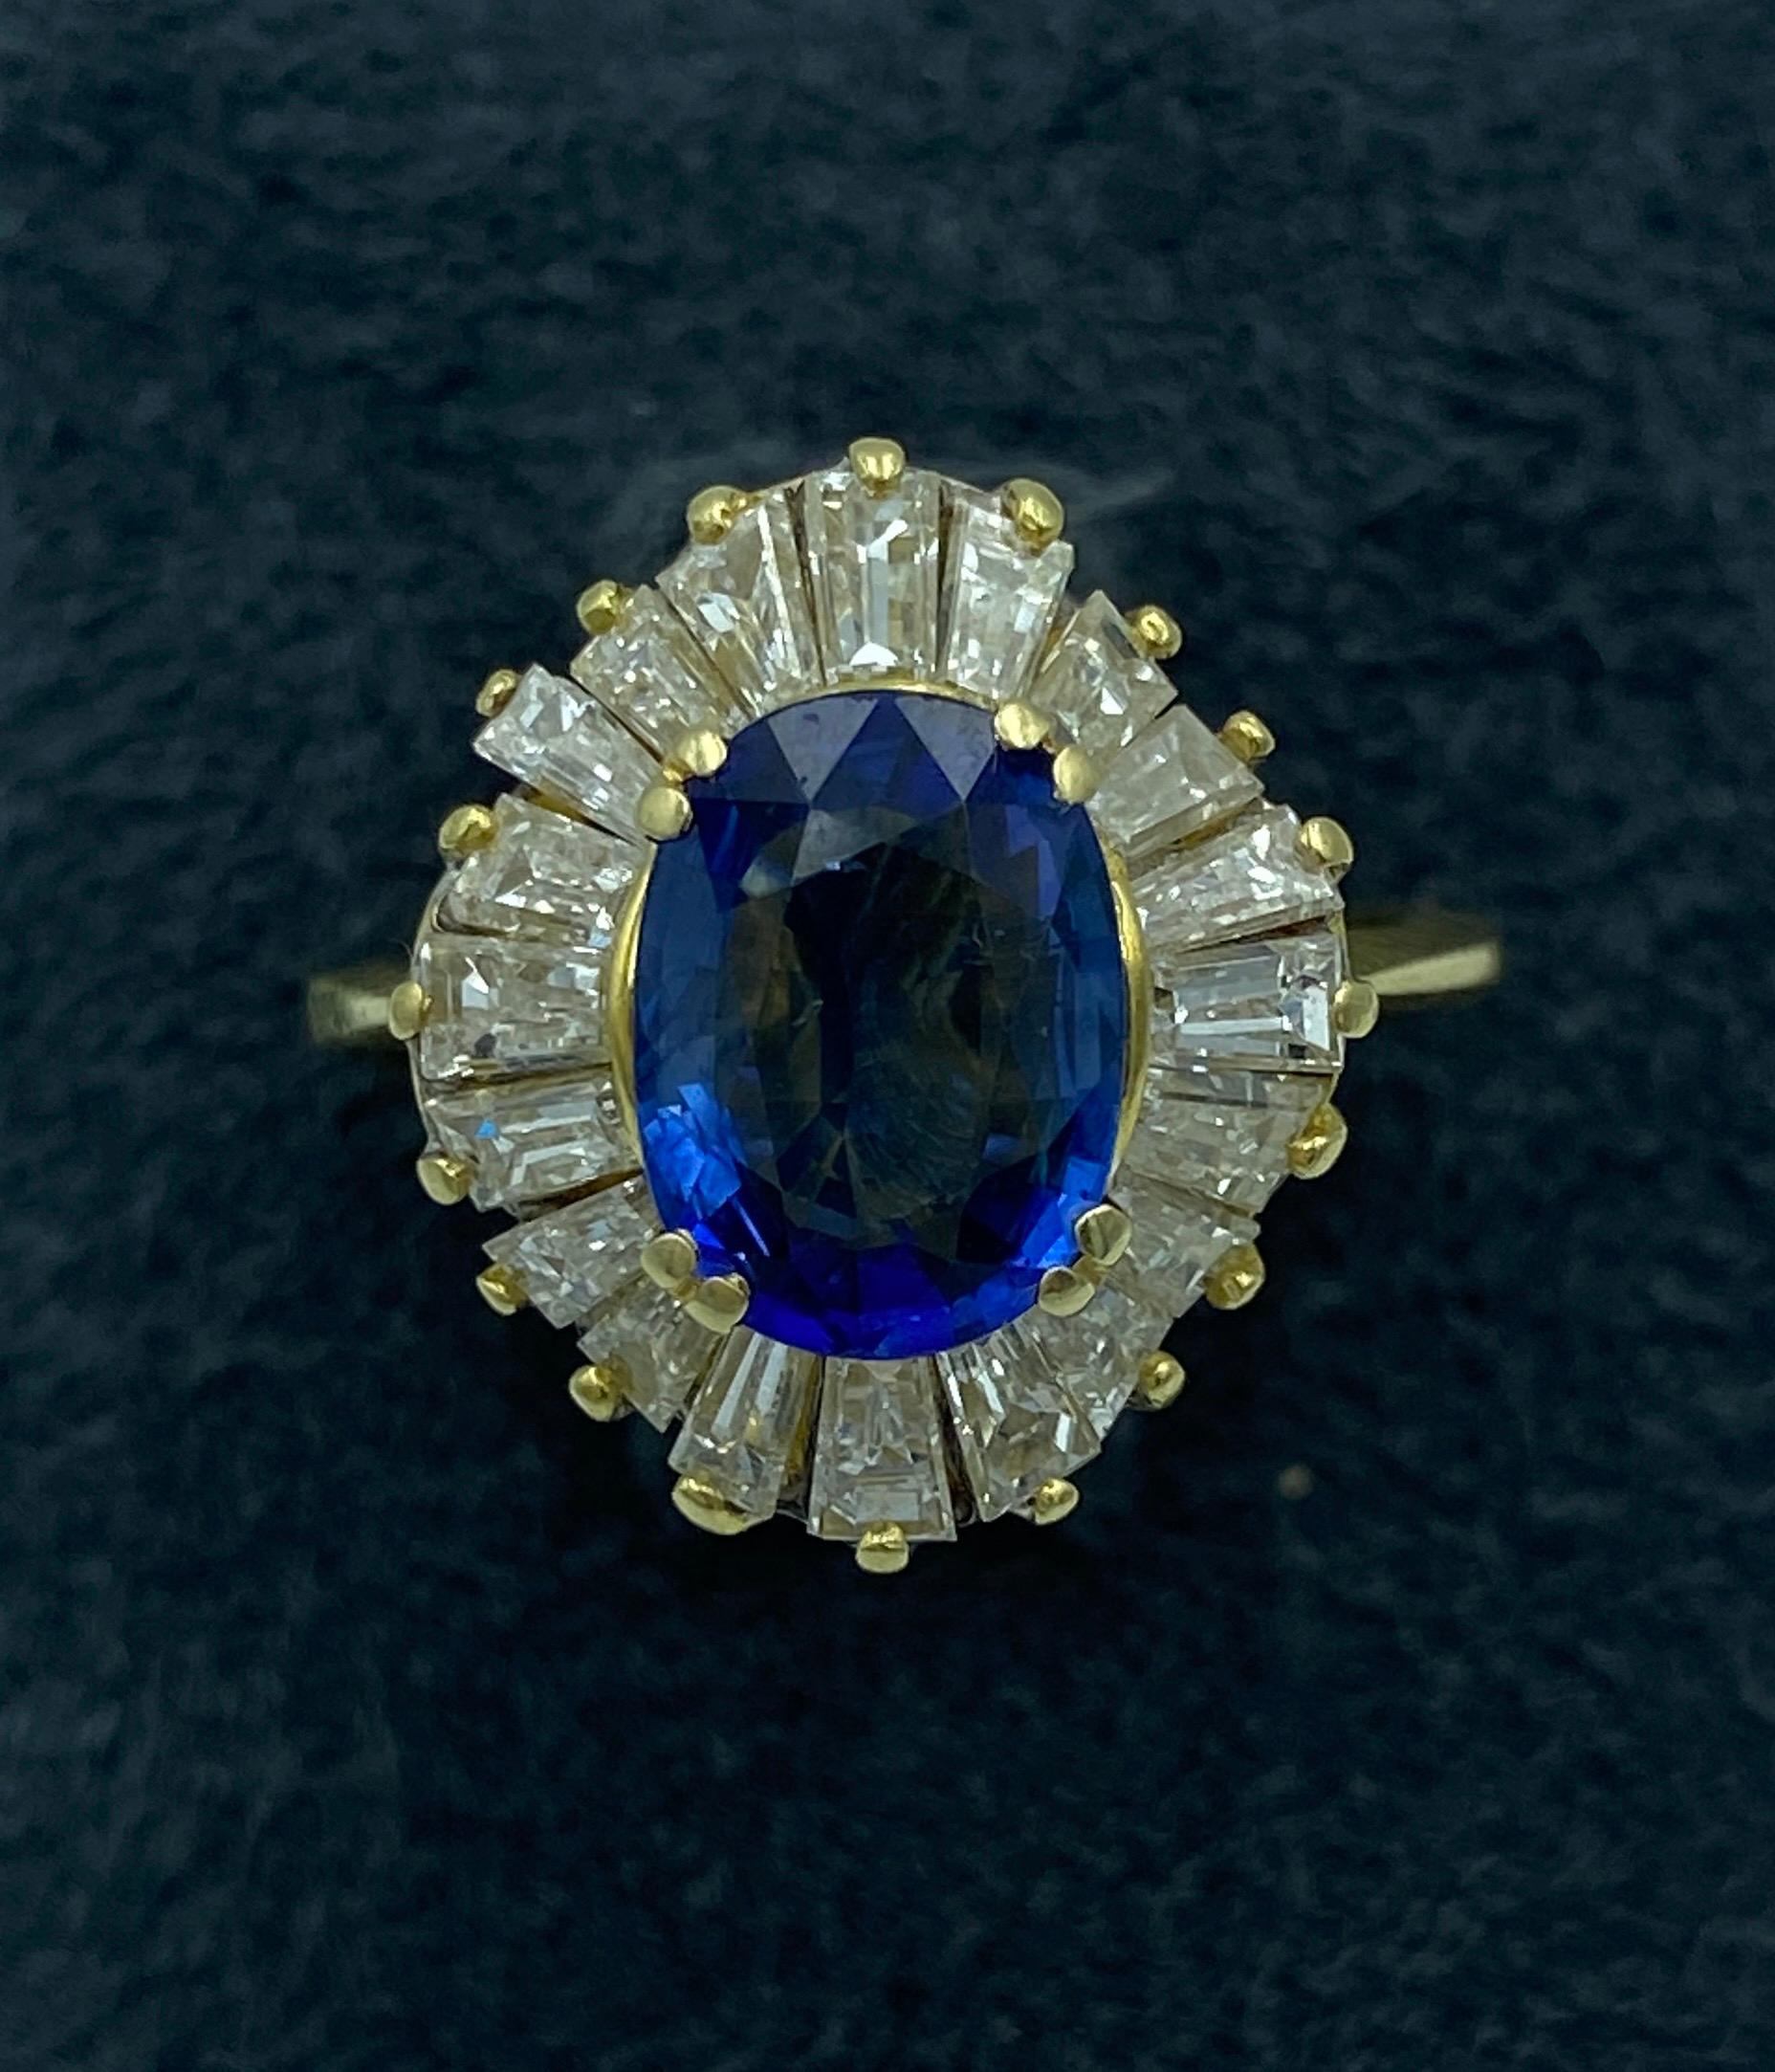 This beautiful 1950s 18 carat gold Italian ring has a Ceylon Sapphire centre stone of approximately 2.5 carats. The sapphire is set among a ring of tapered baguette diamonds creating and undulating effect. The tapered baguette diamonds, which total